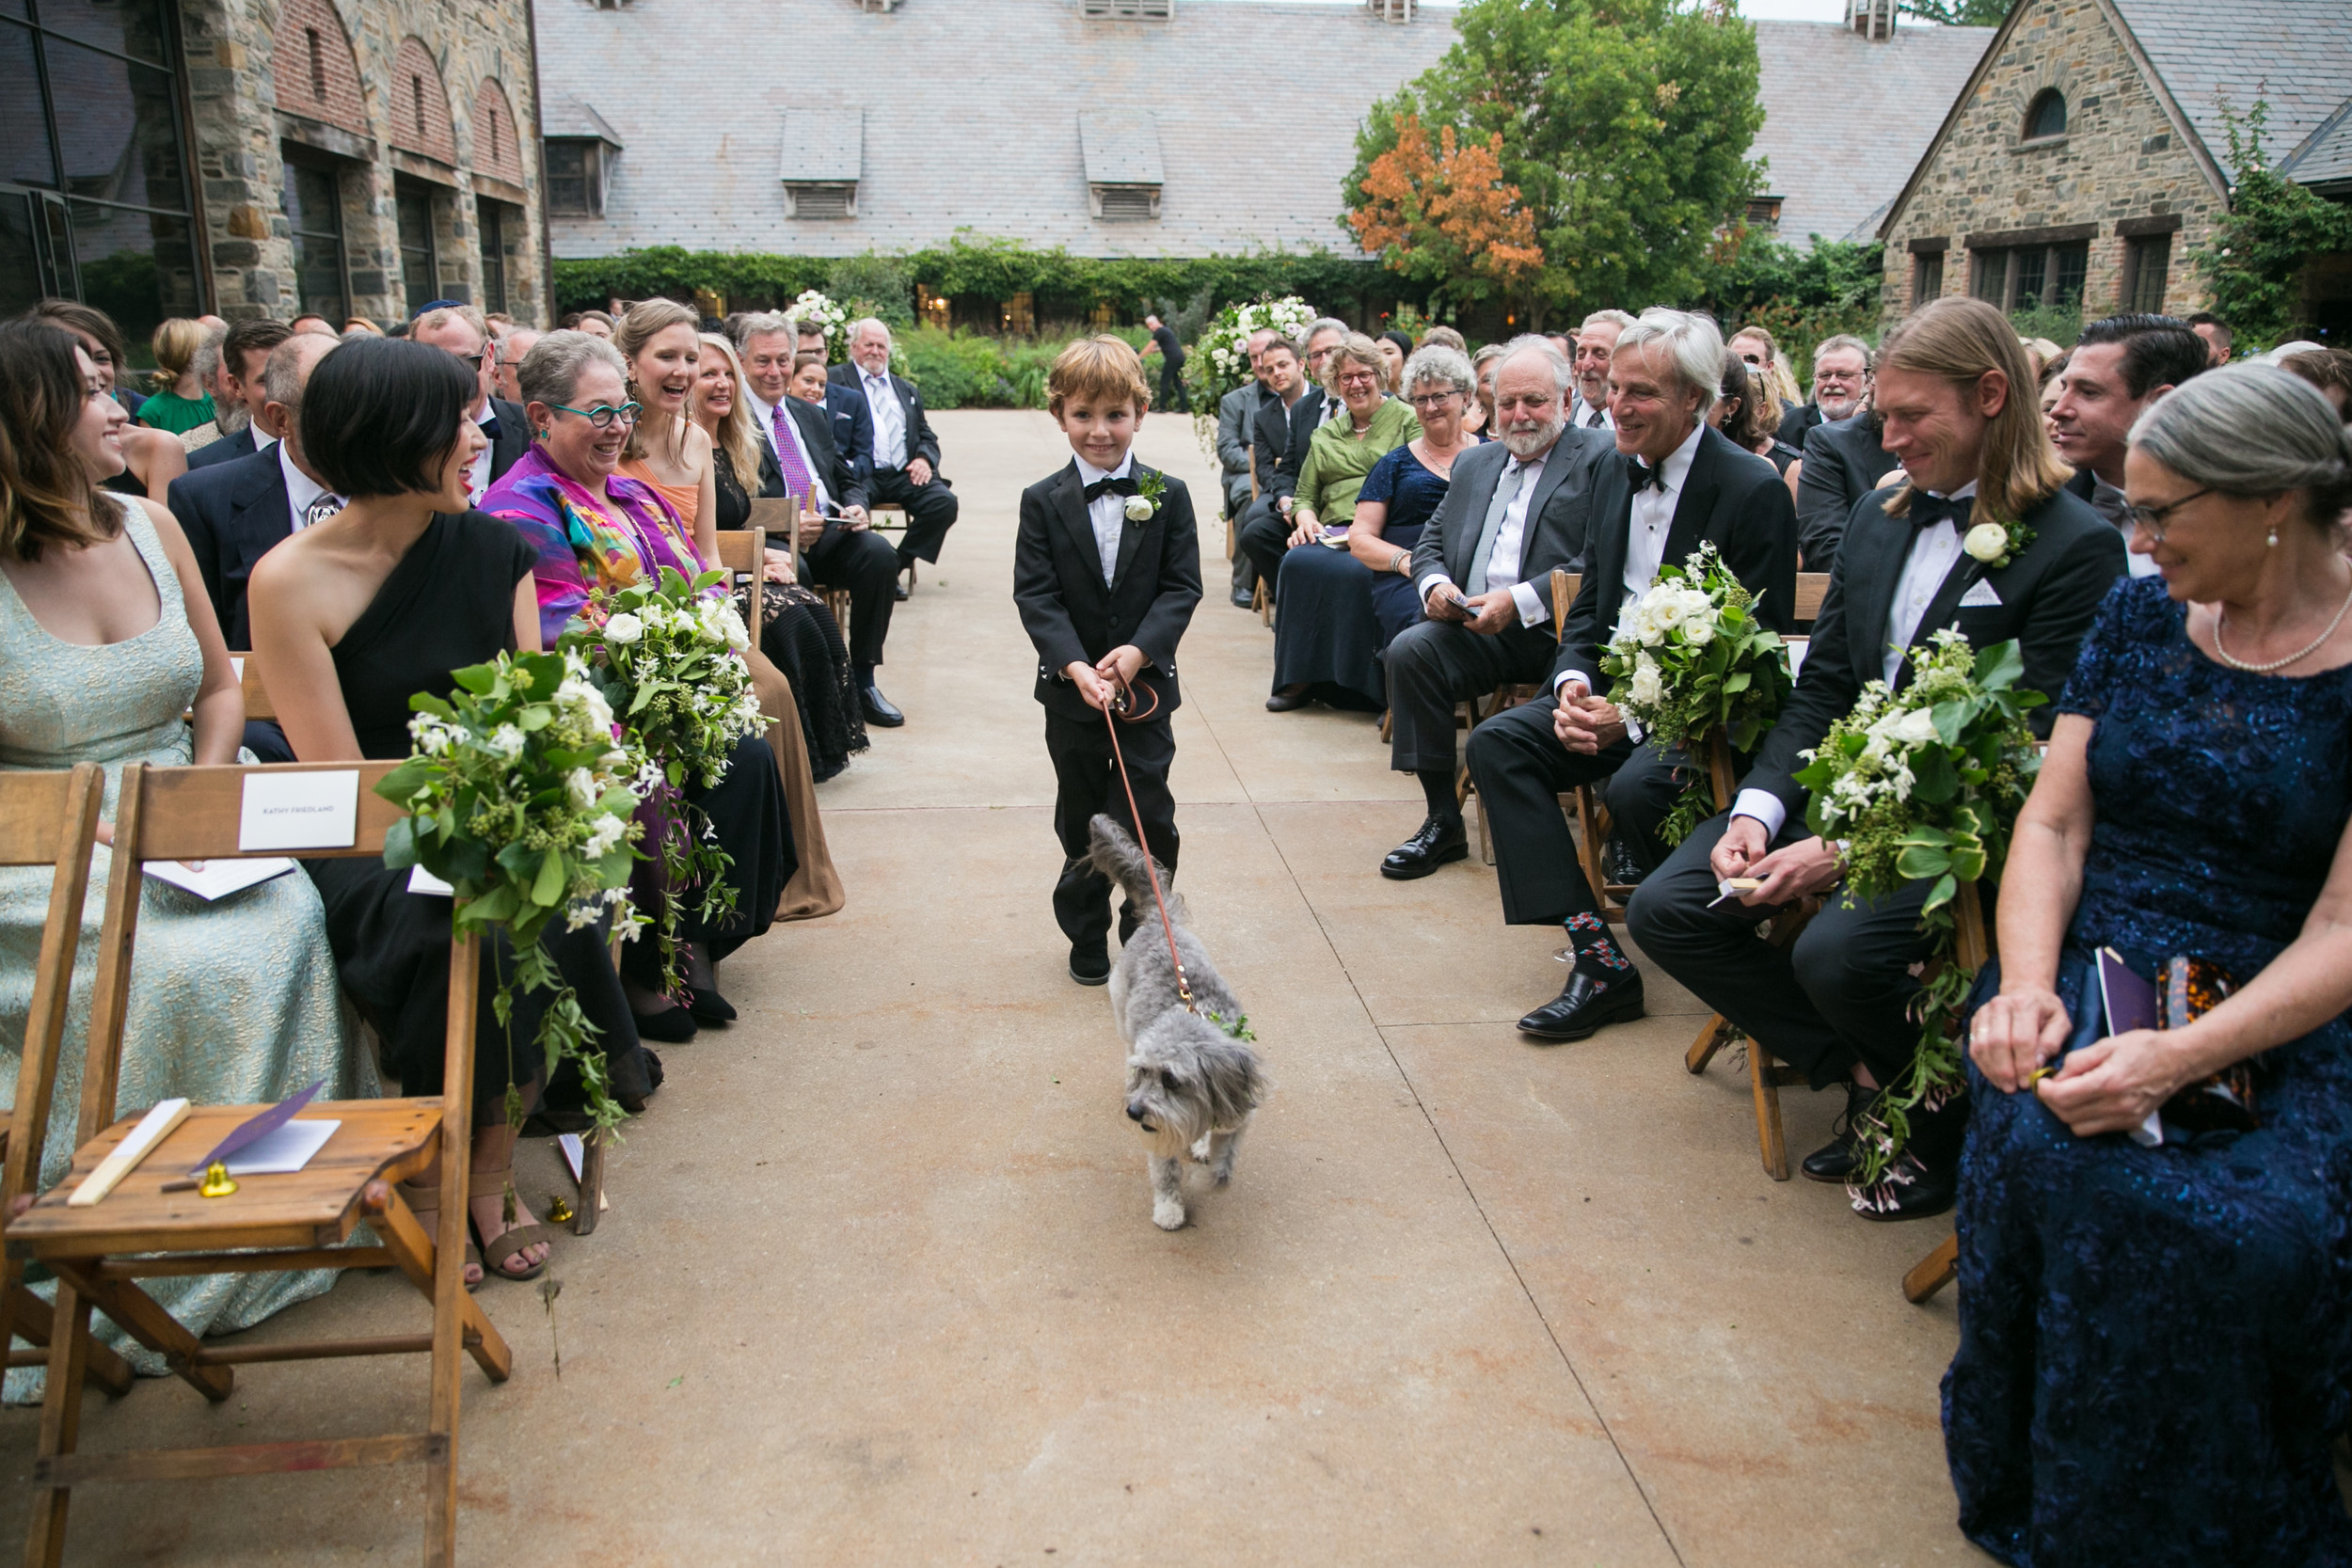 Wyatt Friedland walked Silver down the aisle at a wedding in Tarrytown, thanks to efforts coordinated by Pawfect For You, a dog babysitting business in Malverne.